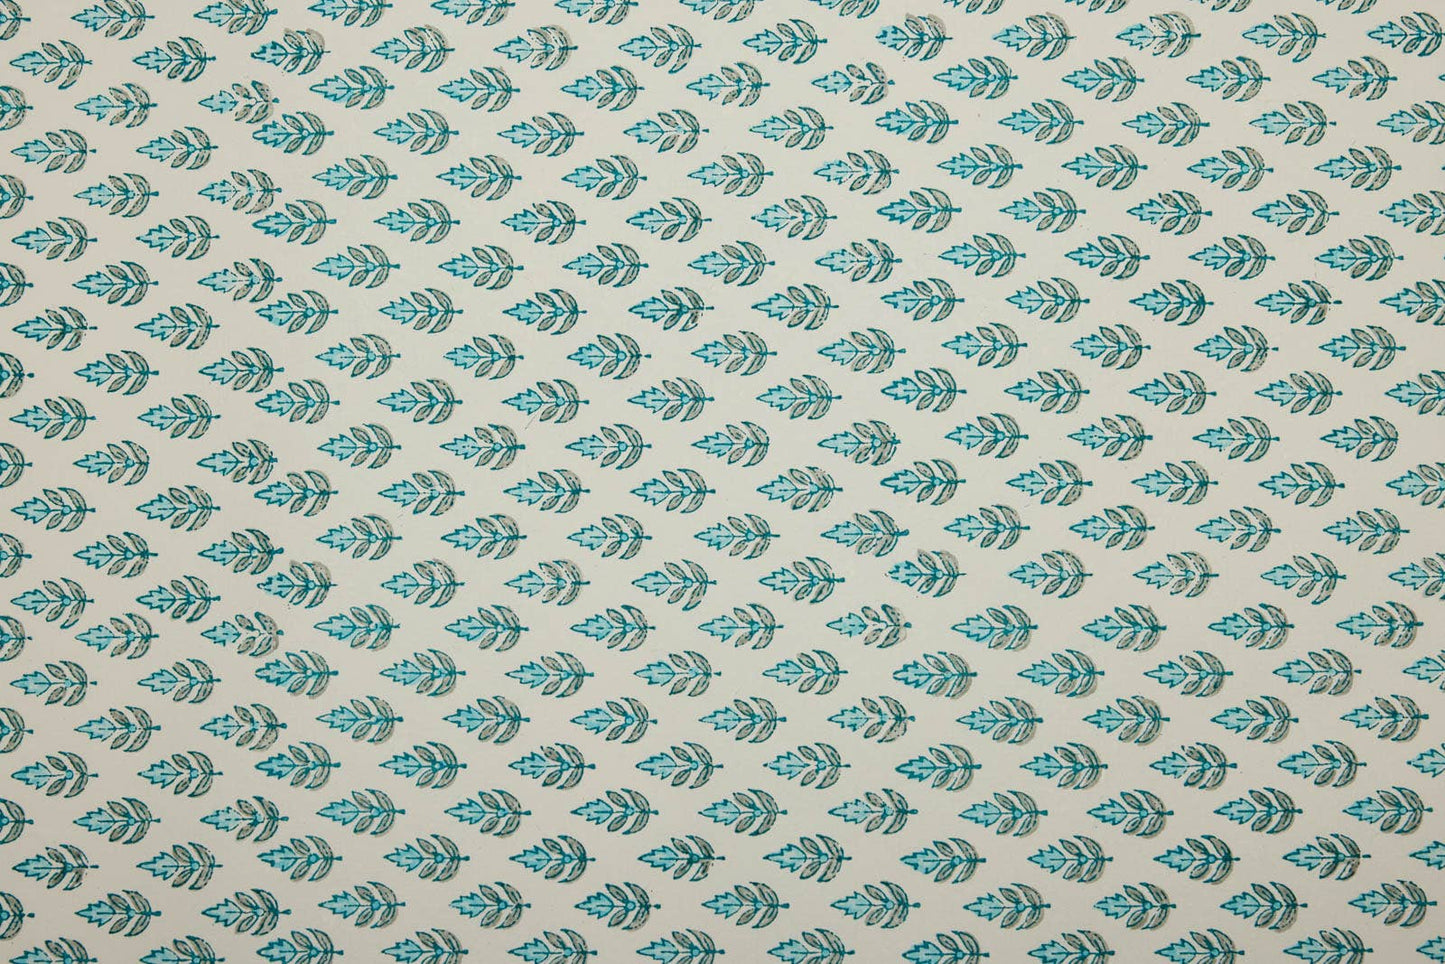 Paper Mirchi - Block Printed Wrapping Paper Sheets - Buti Turquoise